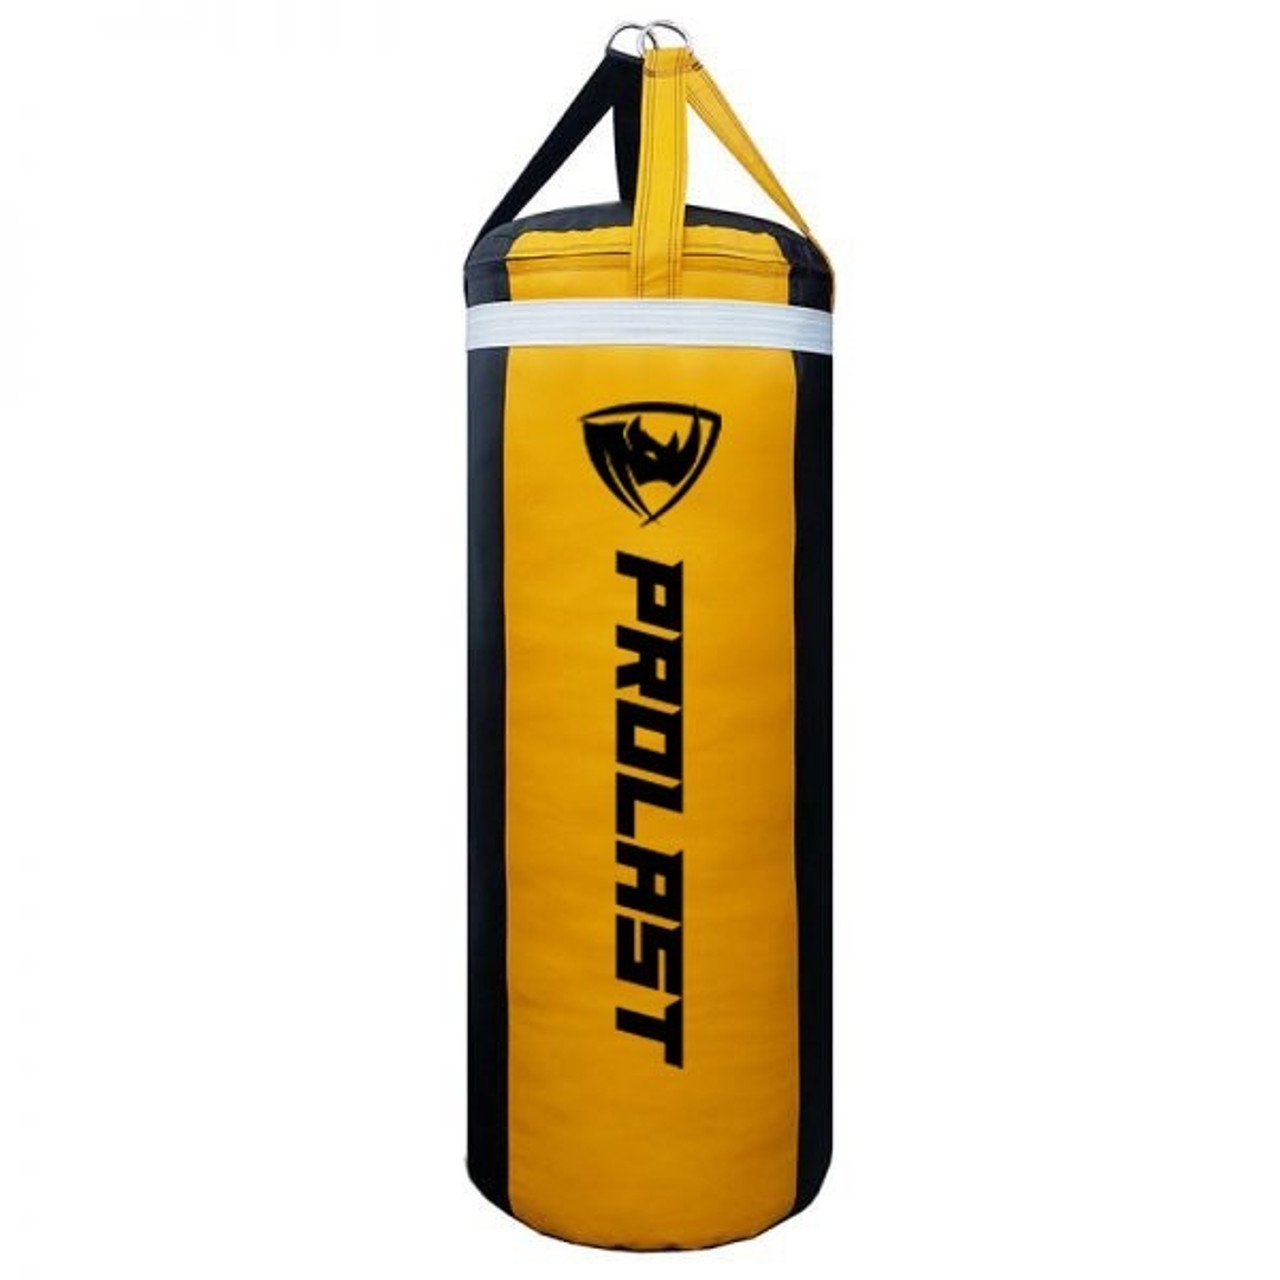 Prolast 4FT XL 135LB Mayweather Style Punching Bag Black // Yellow // White UNFILLED - Made in USA